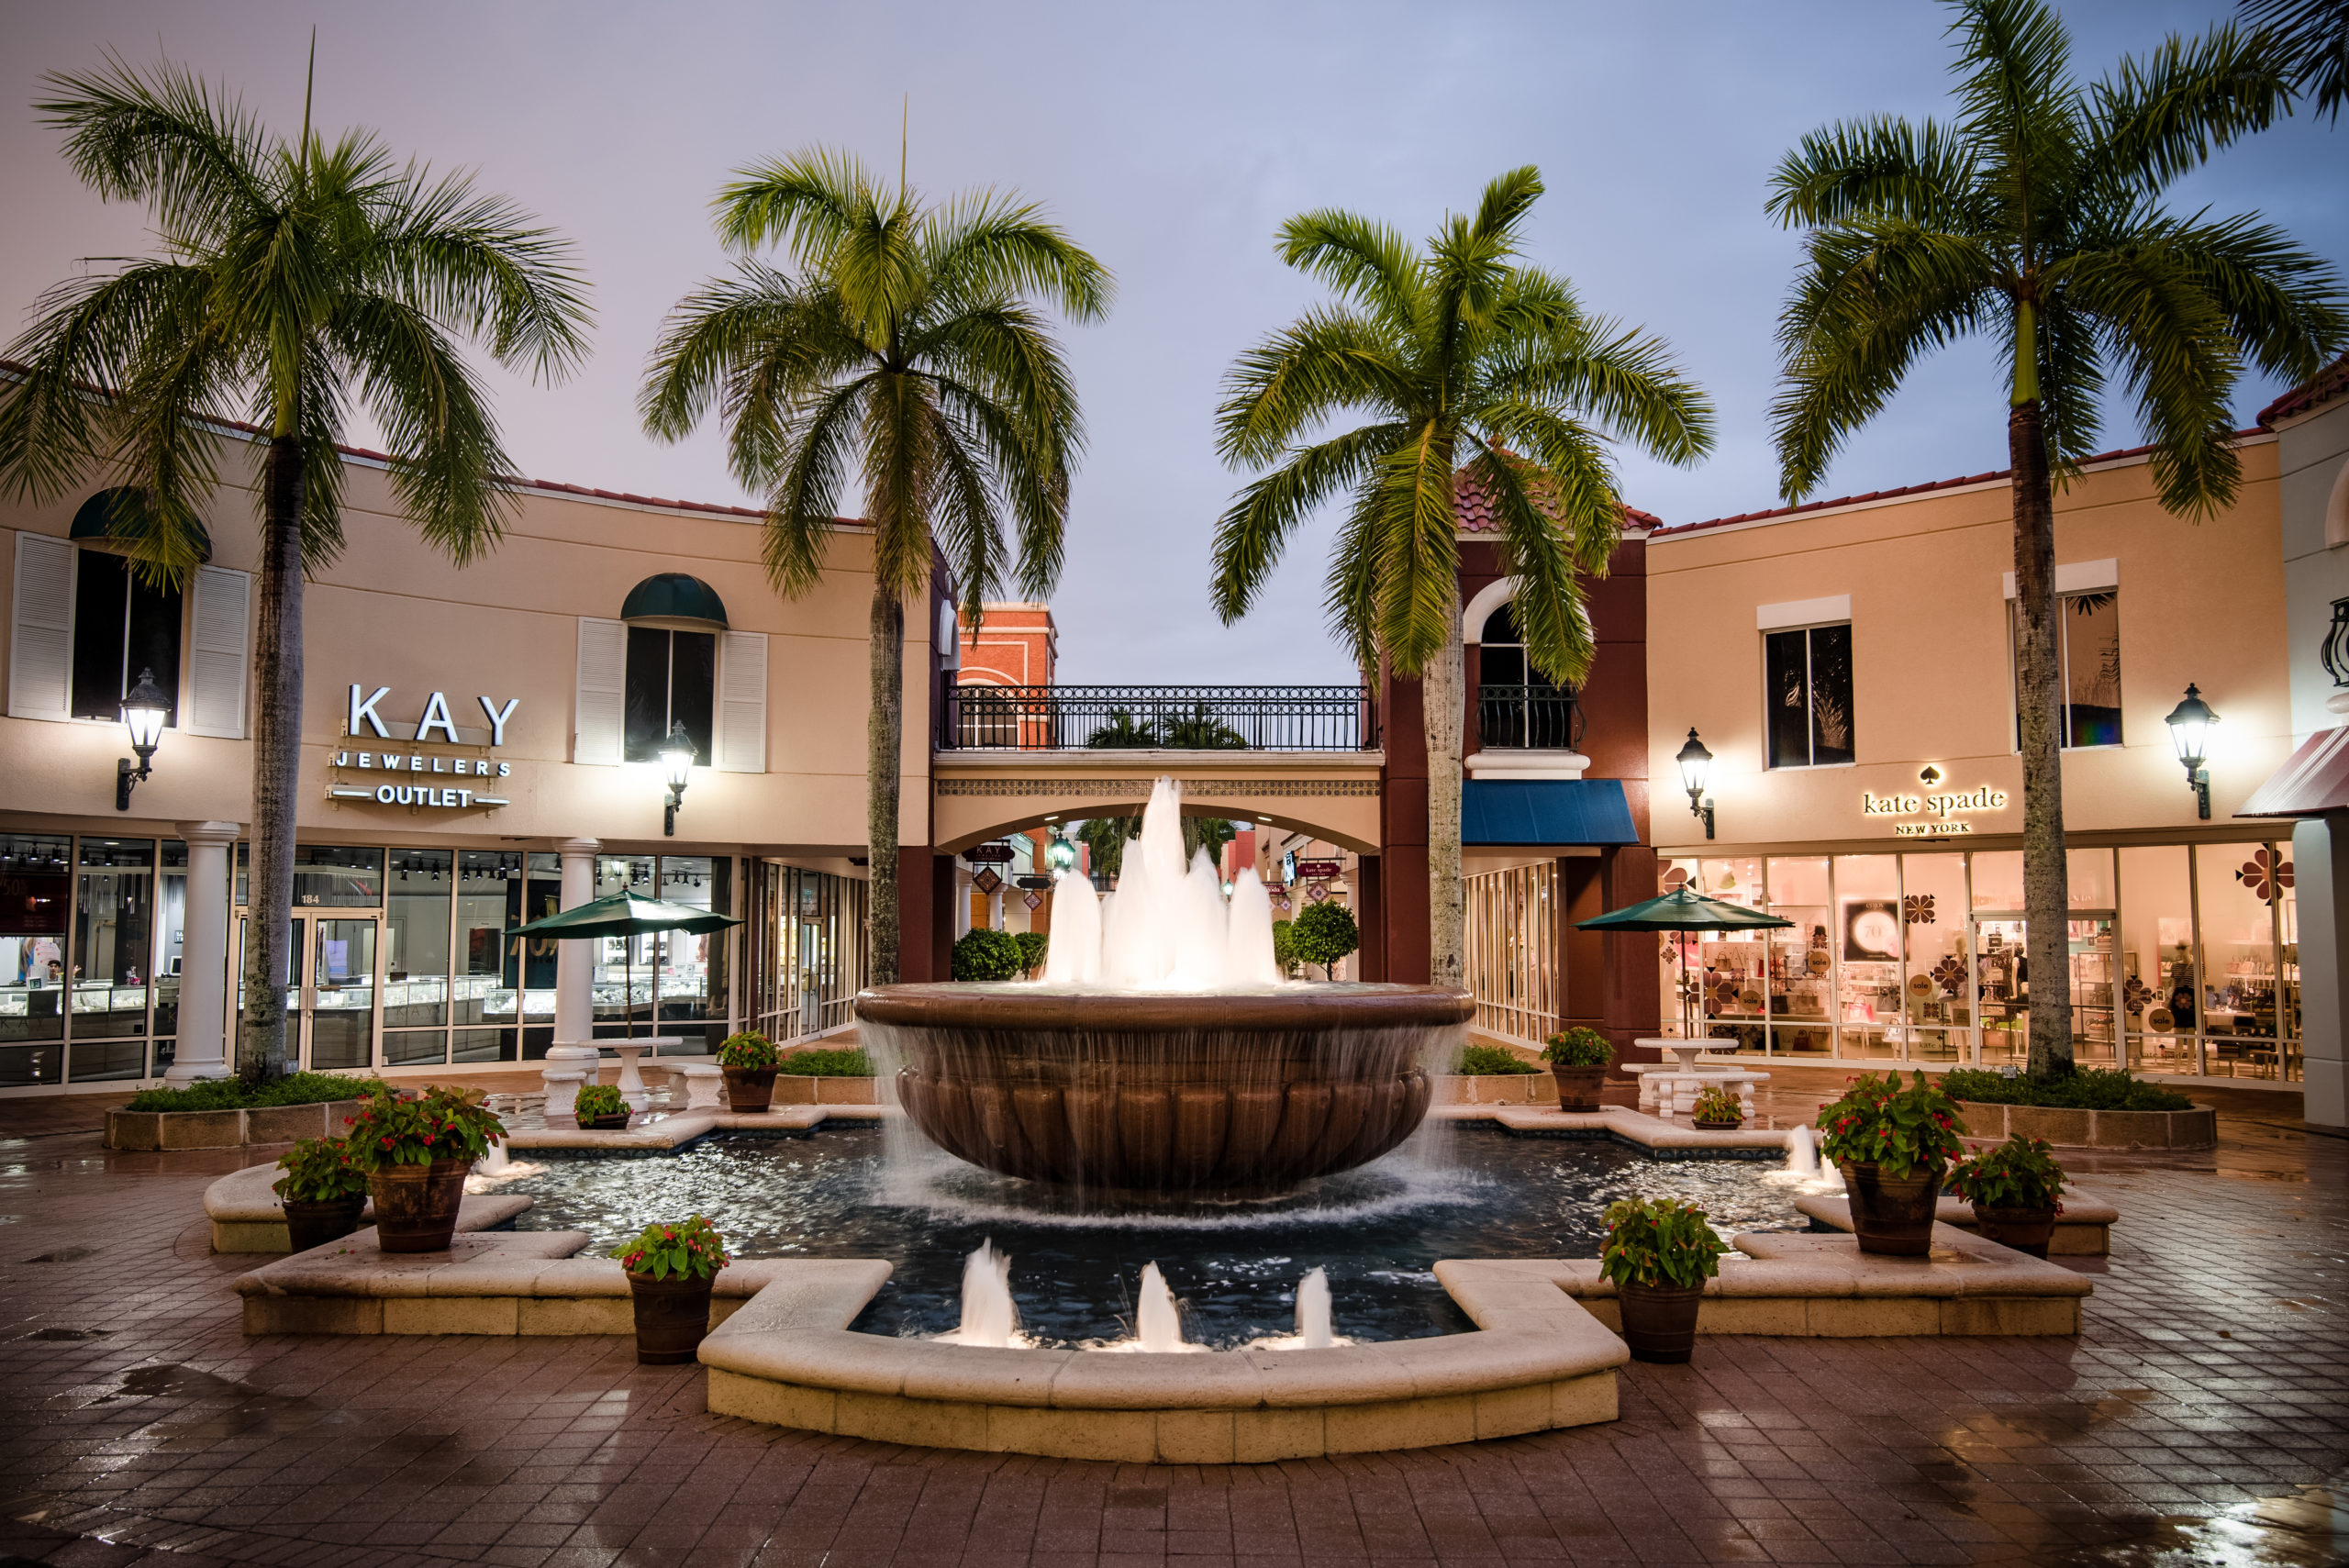 Leggings Park opens at Miromar Outlets - Gulfshore Business